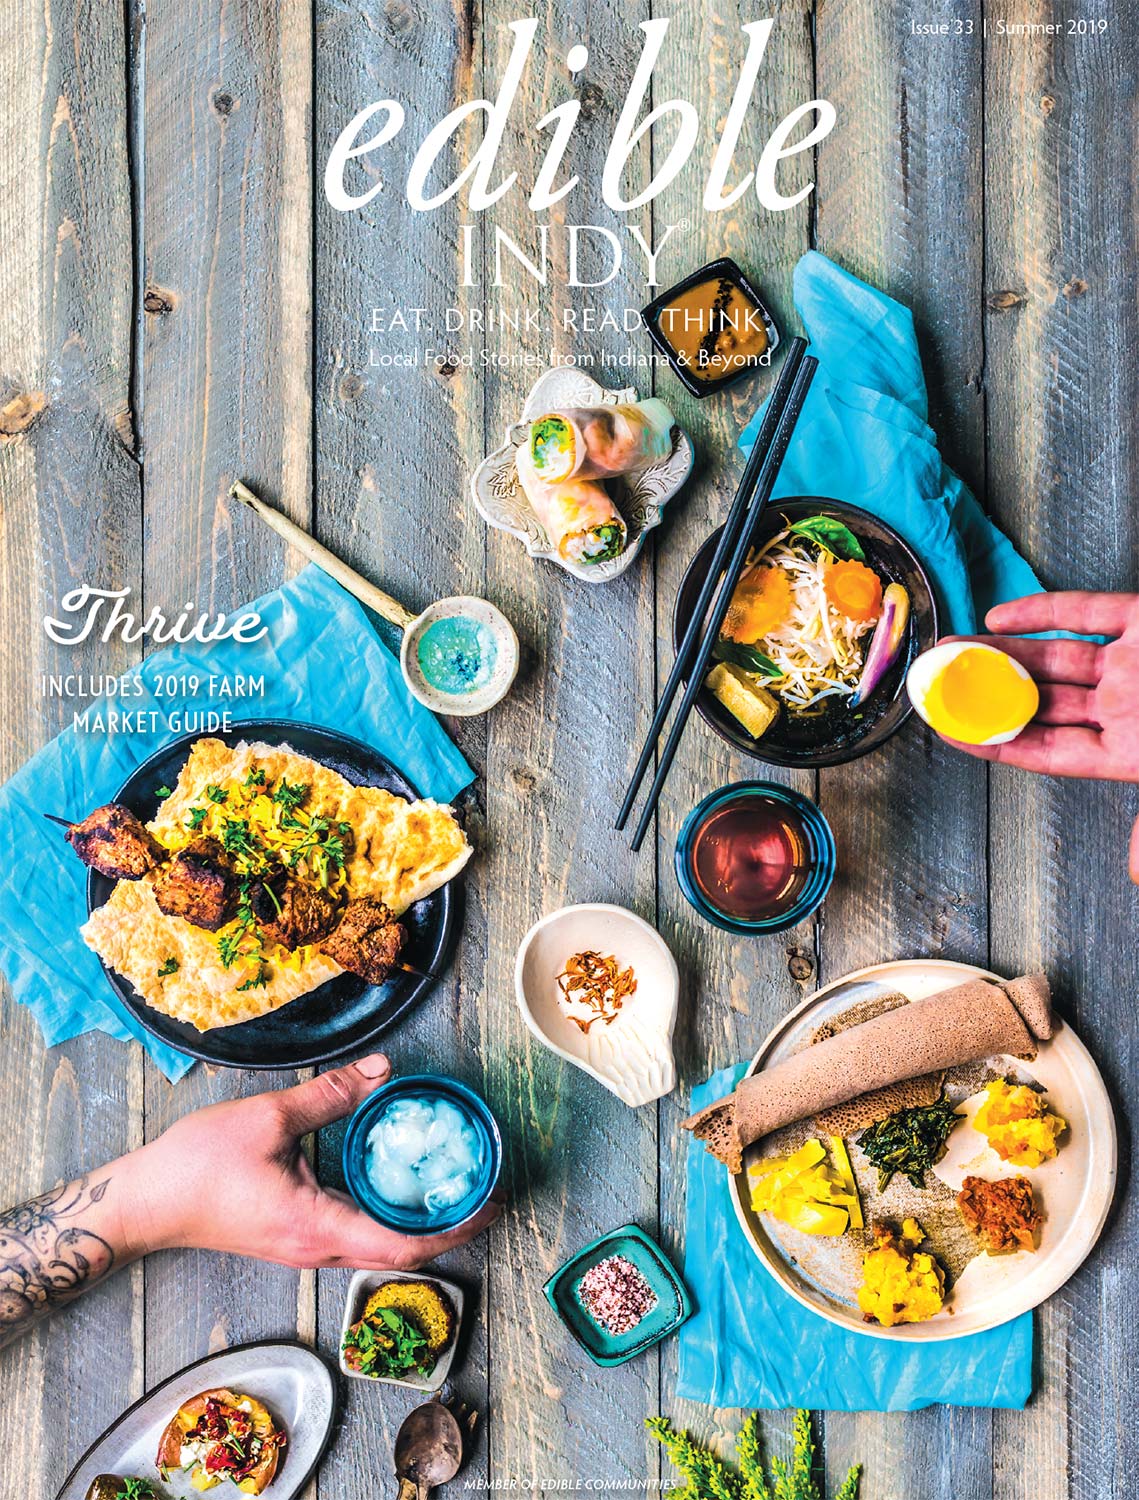 edible Indy magazine Summer 2019 cover